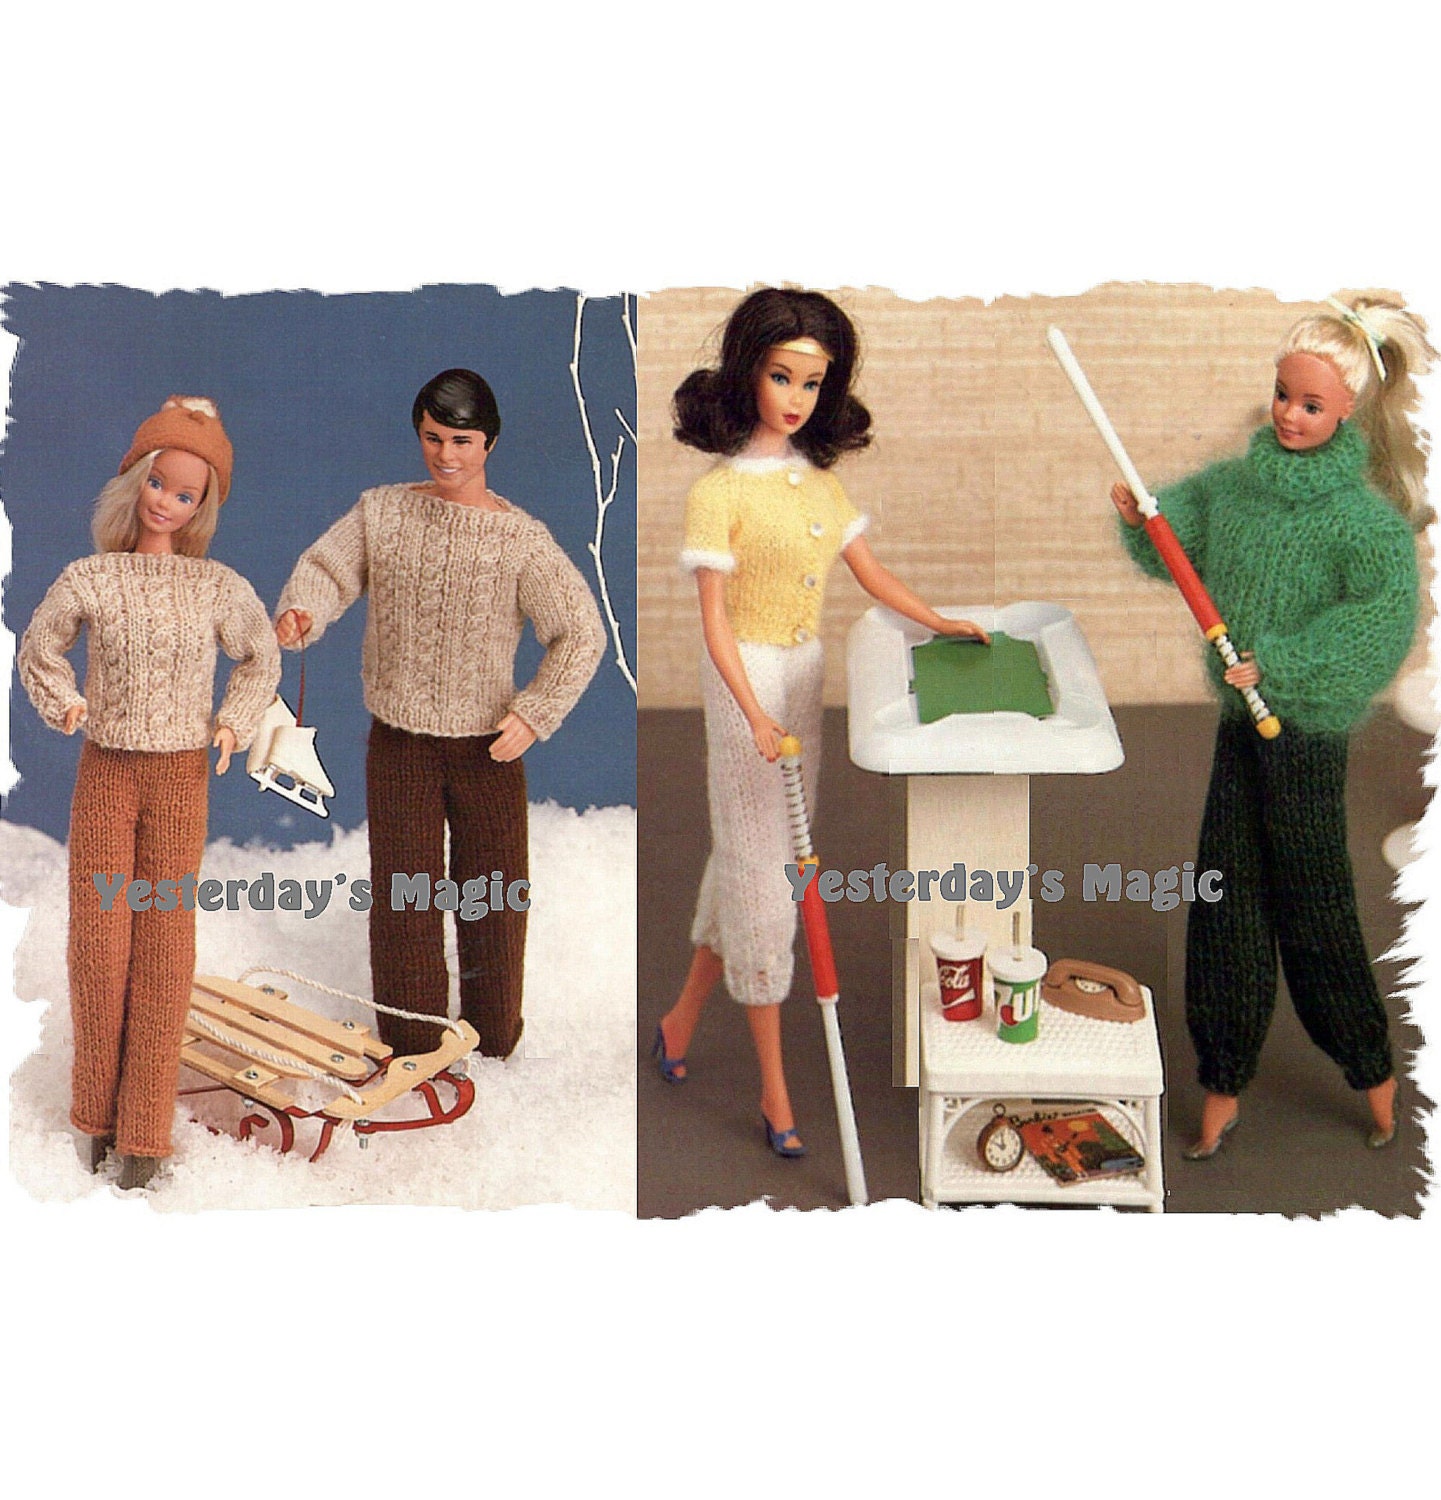 Vintage Ken Clothes Patterns Make a Great Holiday Gift for Doll Collectors  #VintageDolls #ChristmasGiftIdeas - Free Doll Clothes Patterns